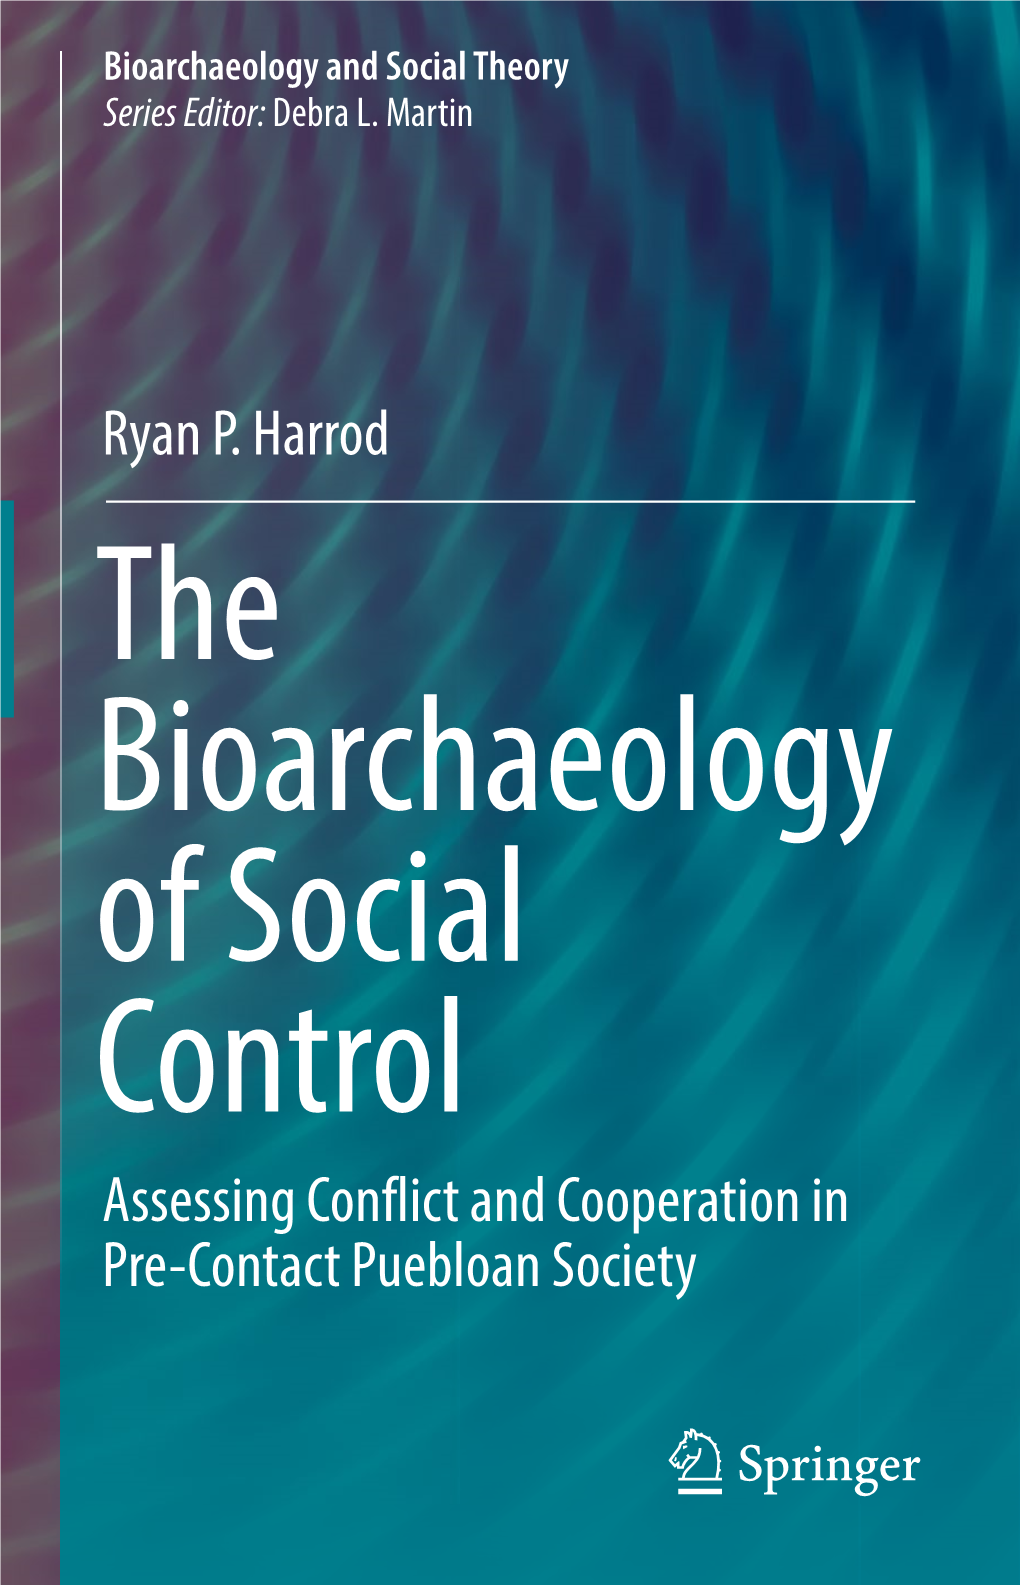 Ryan P. Harrod Assessing Conflict and Cooperation in Pre-Contact